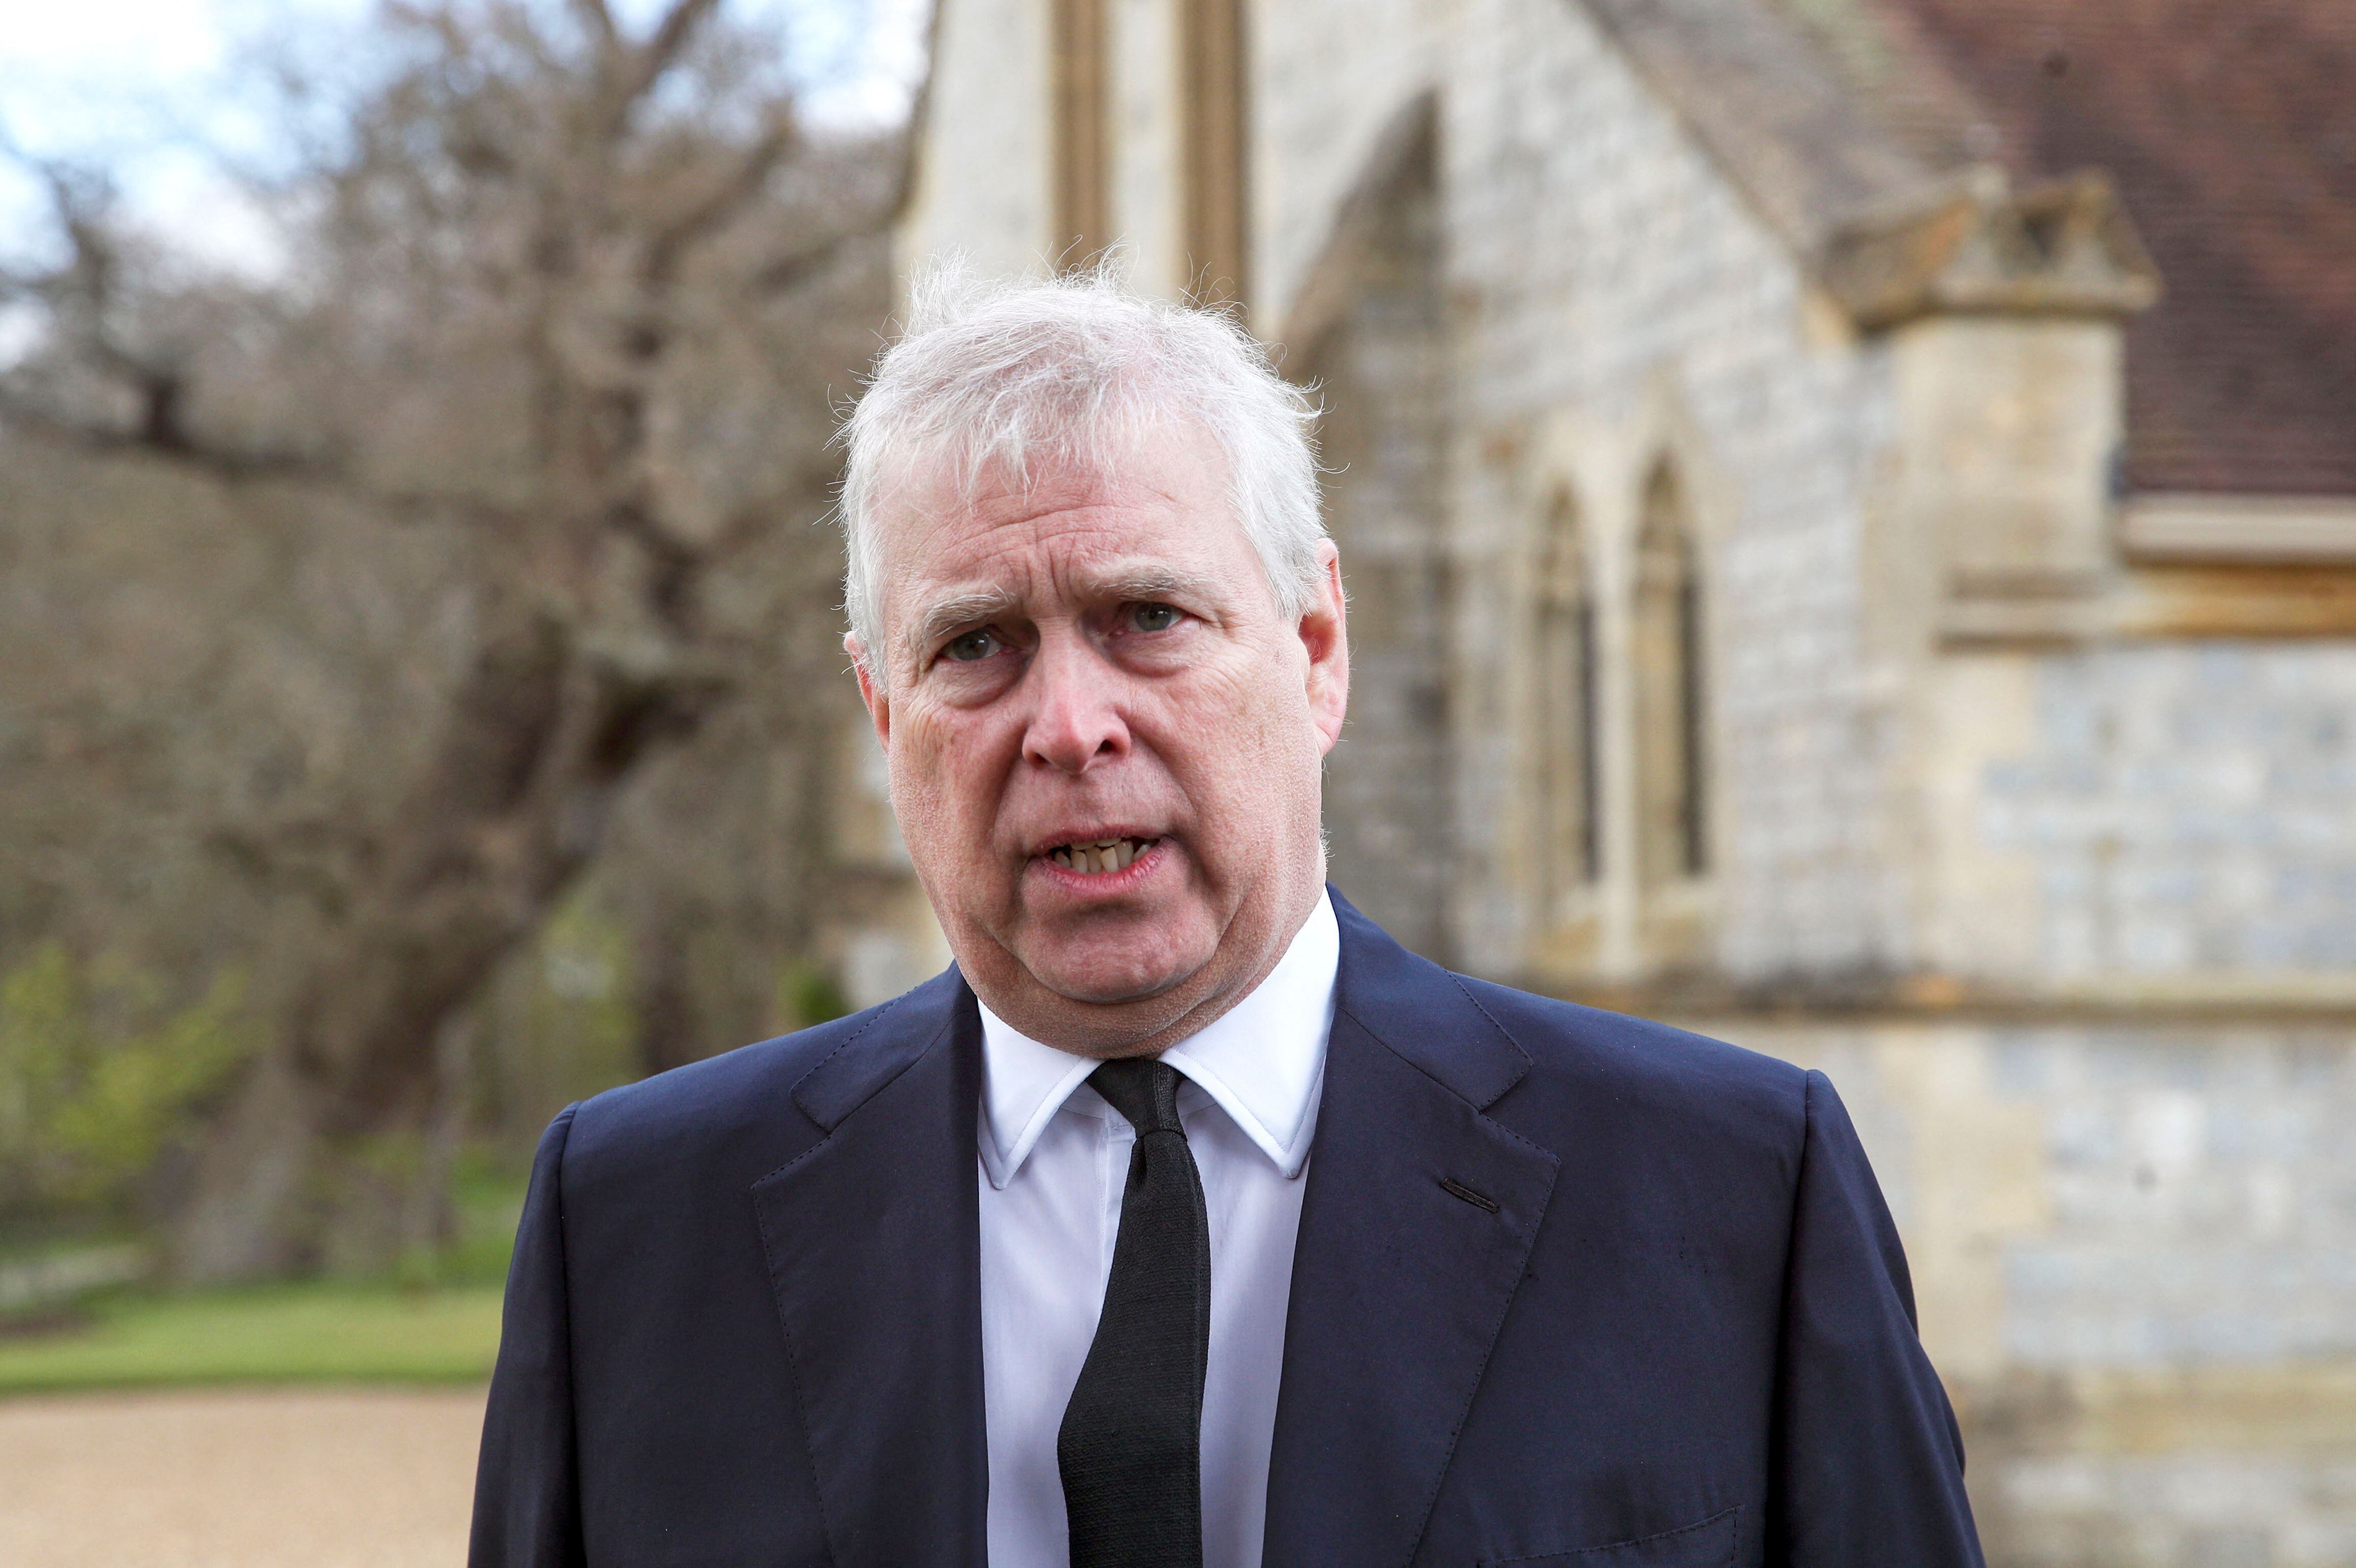 (FILES) In this file photo taken on April 11, 2021, Britain's Prince Andrew, Duke of York, speaks during a television interview outside the Royal Chapel of All Saints in Windsor. - A US judge on January 12, 2022 denied Prince Andrew's plea to dismiss a sexual assault lawsuit brought against the British royal, paving the way for the case to proceed, a court filing showed. (Photo by Steve Parsons / POOL / AFP)